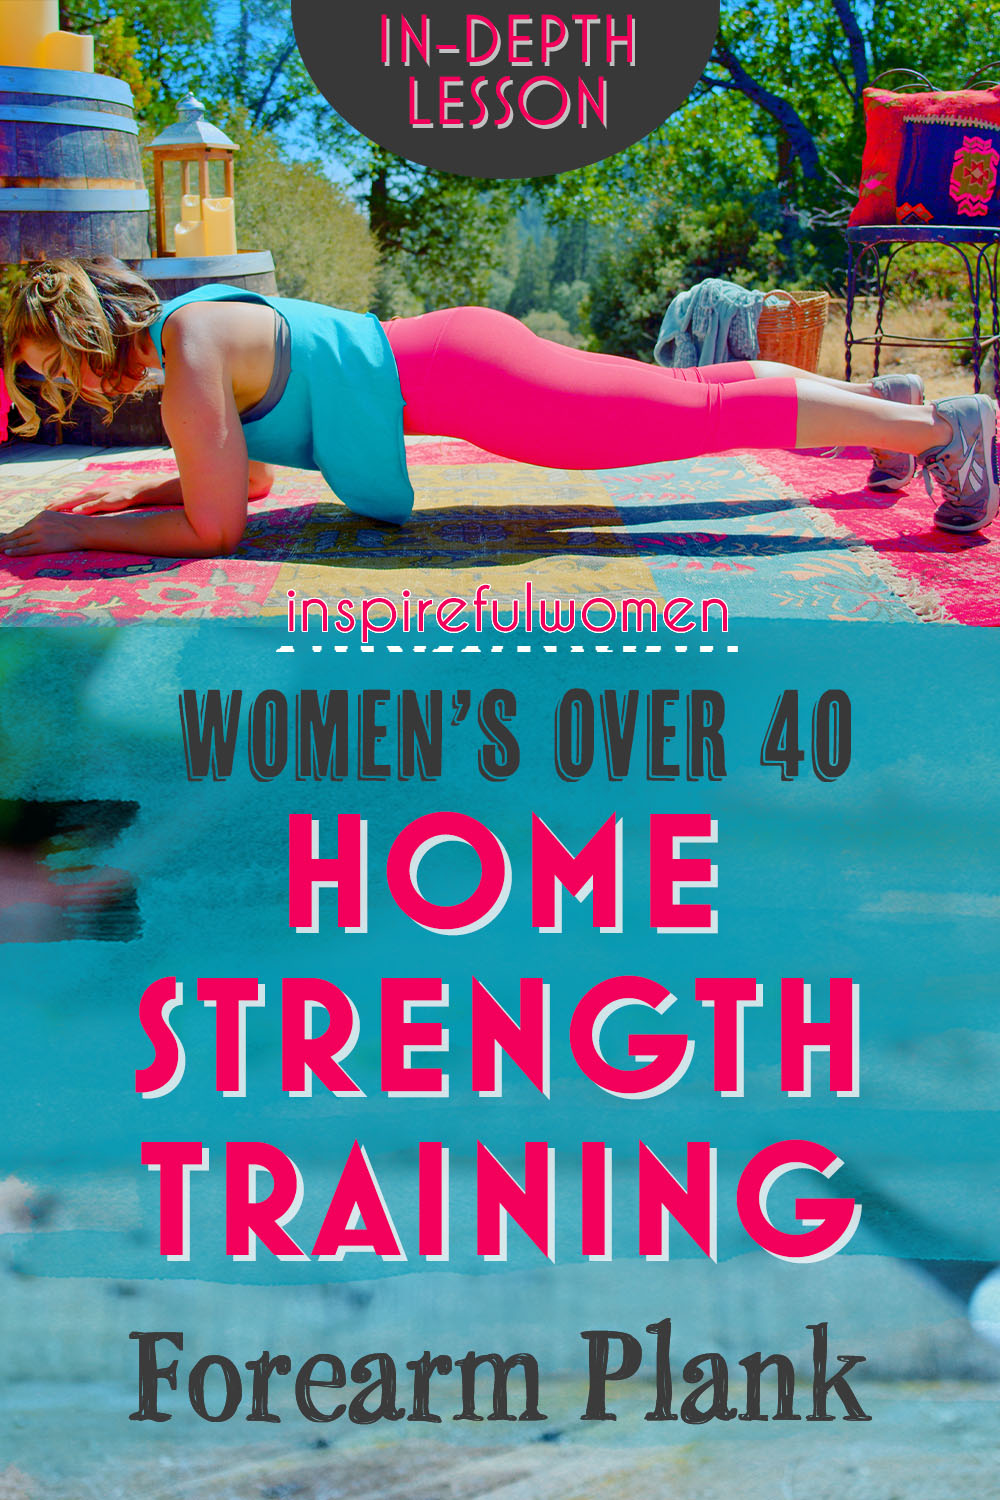 forearm-plank-variation-beginner-bodyweight-core-ab-exercise-at-home-women-40-plus